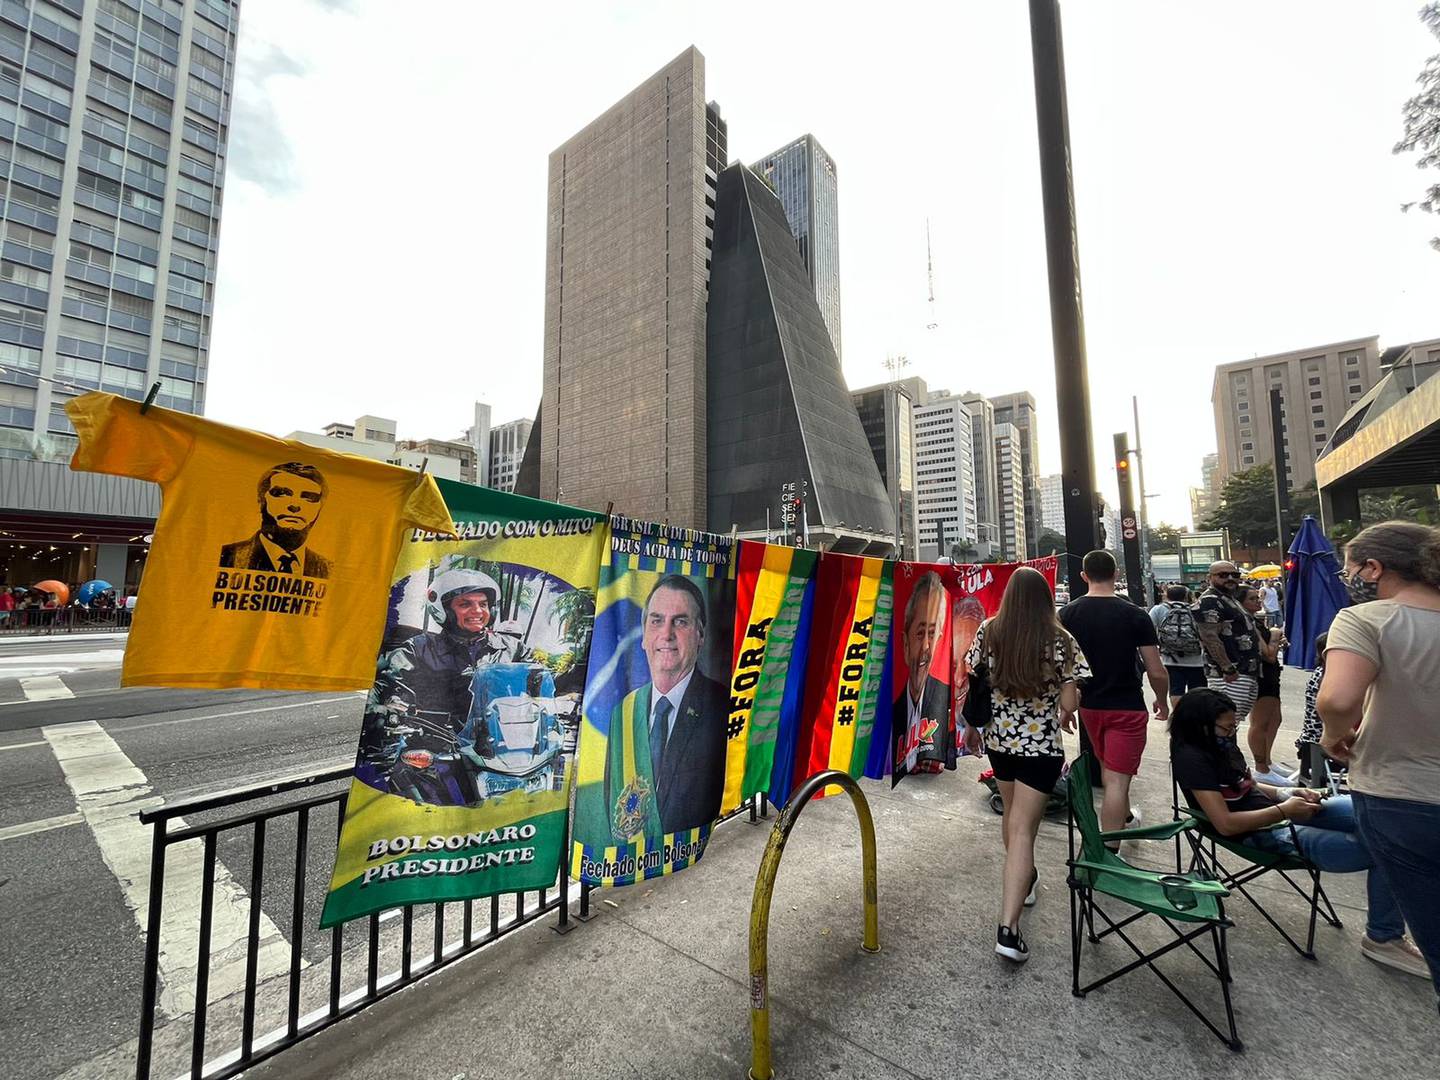 Towels and T-shirt of Jair Bolsonaro and Lula for sale on Avenida Paulista, in São Paulo. Each costs $7.28dfd